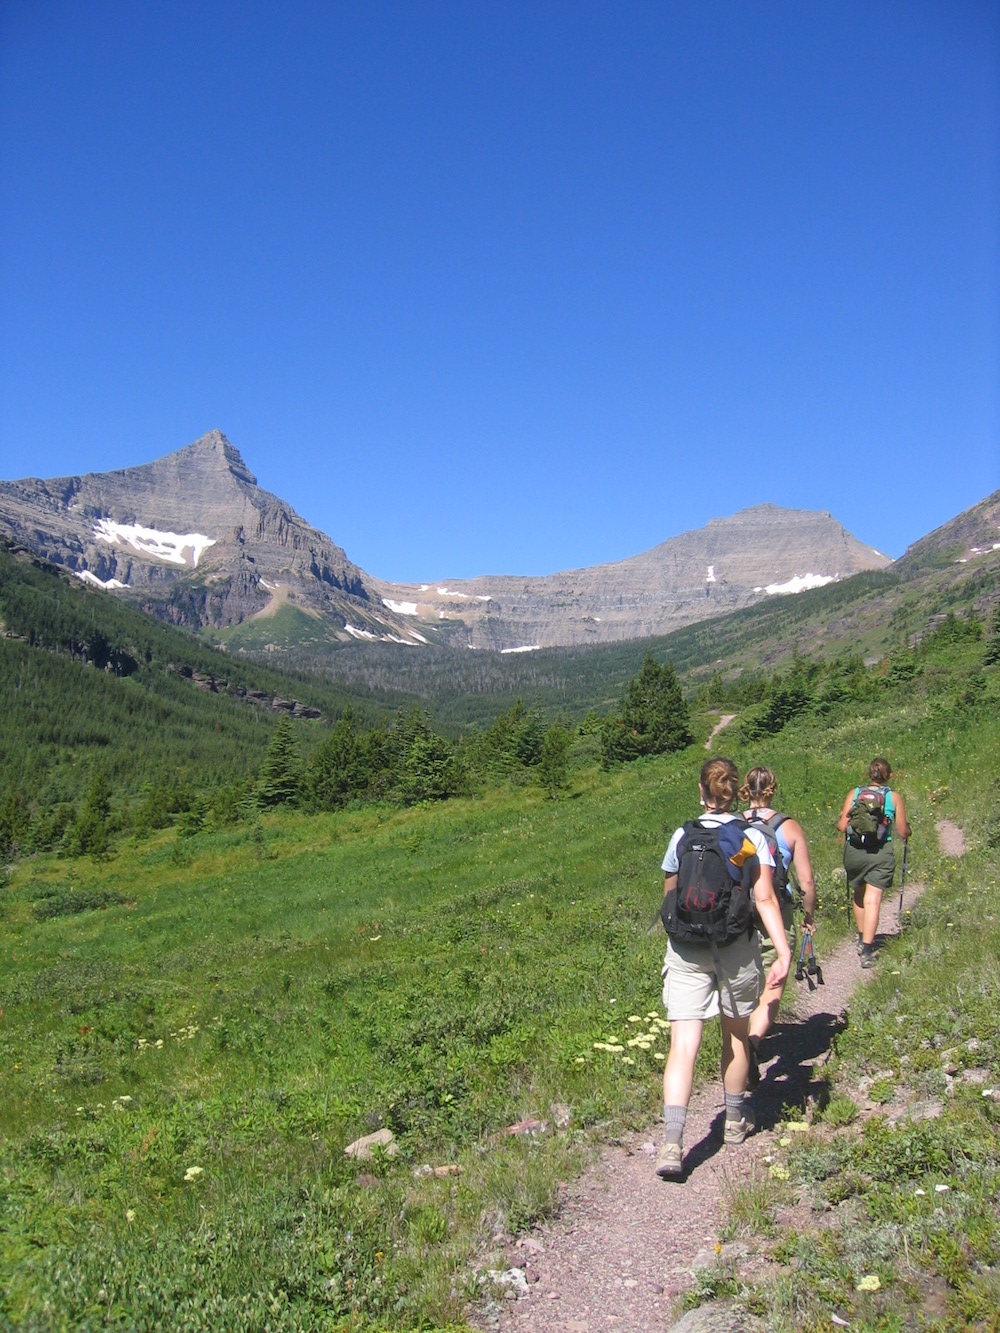 Happy hikers on the Dawson-Pitamakin Loop trail in the Two Medicine area of Glacier National Park, Montana. Flinsch Peak is to the left.